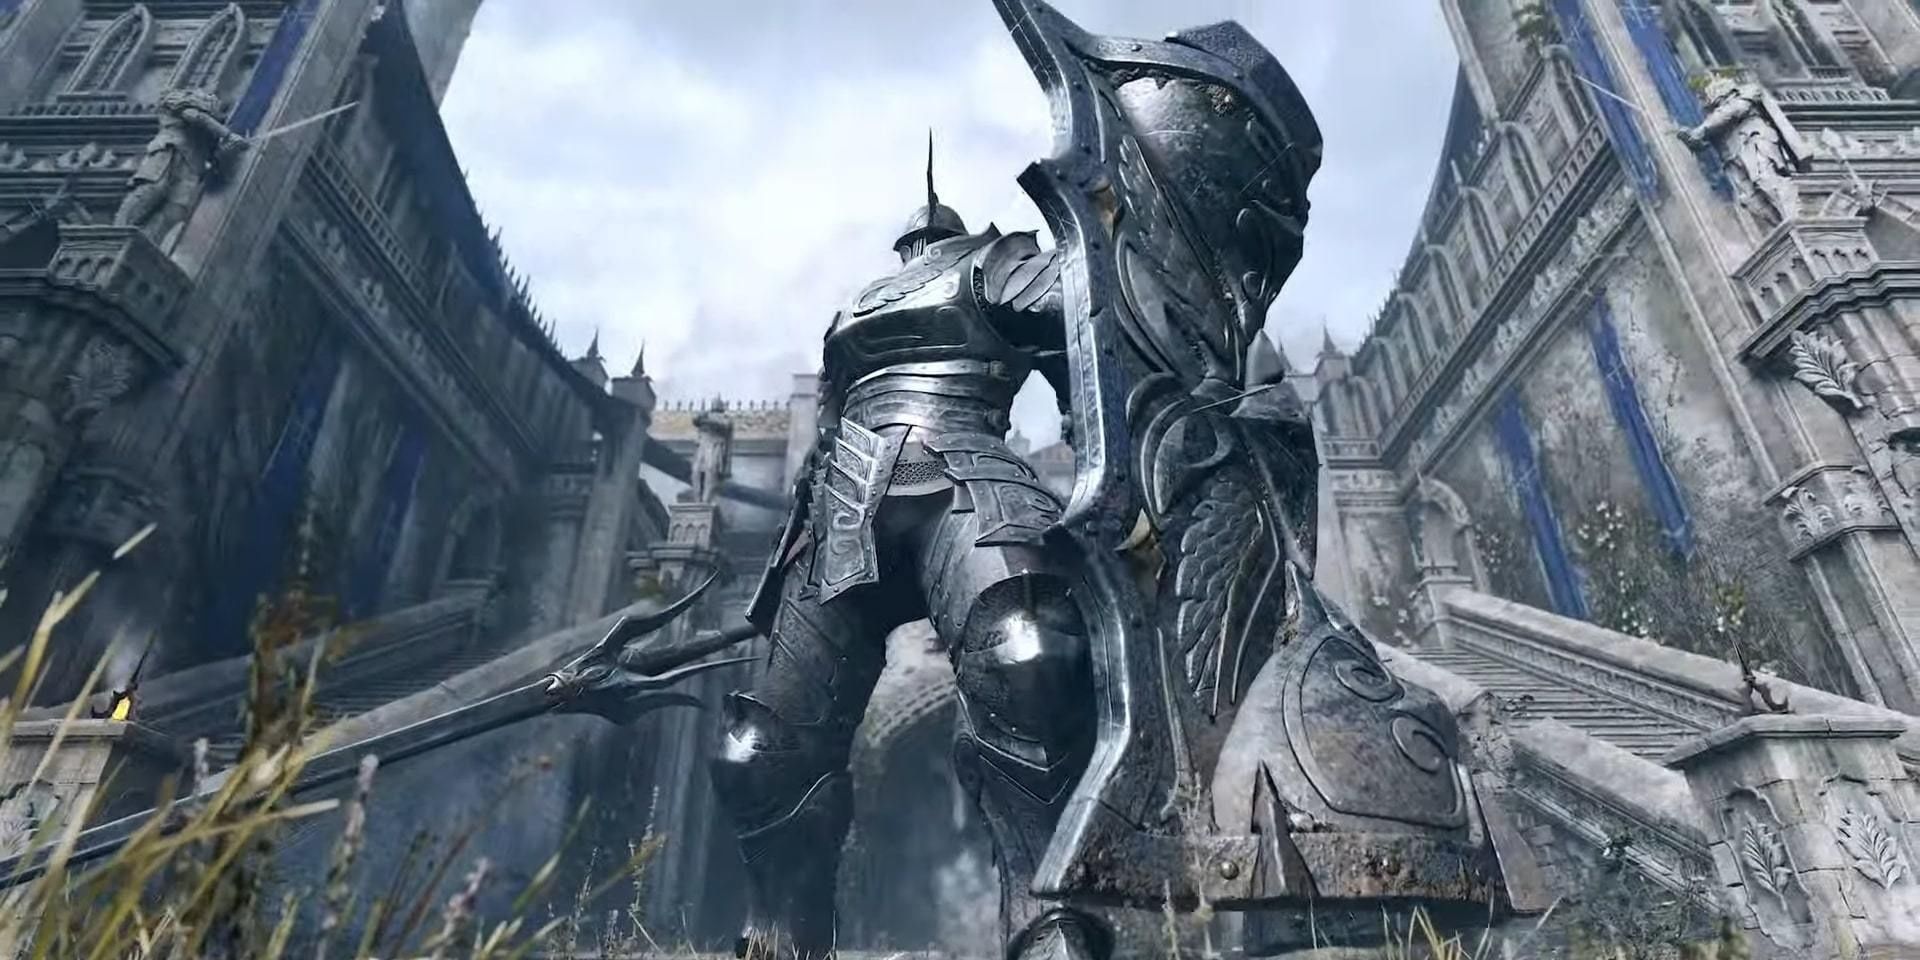 Demon's Souls: Every Class, Ranked From Worst to Best